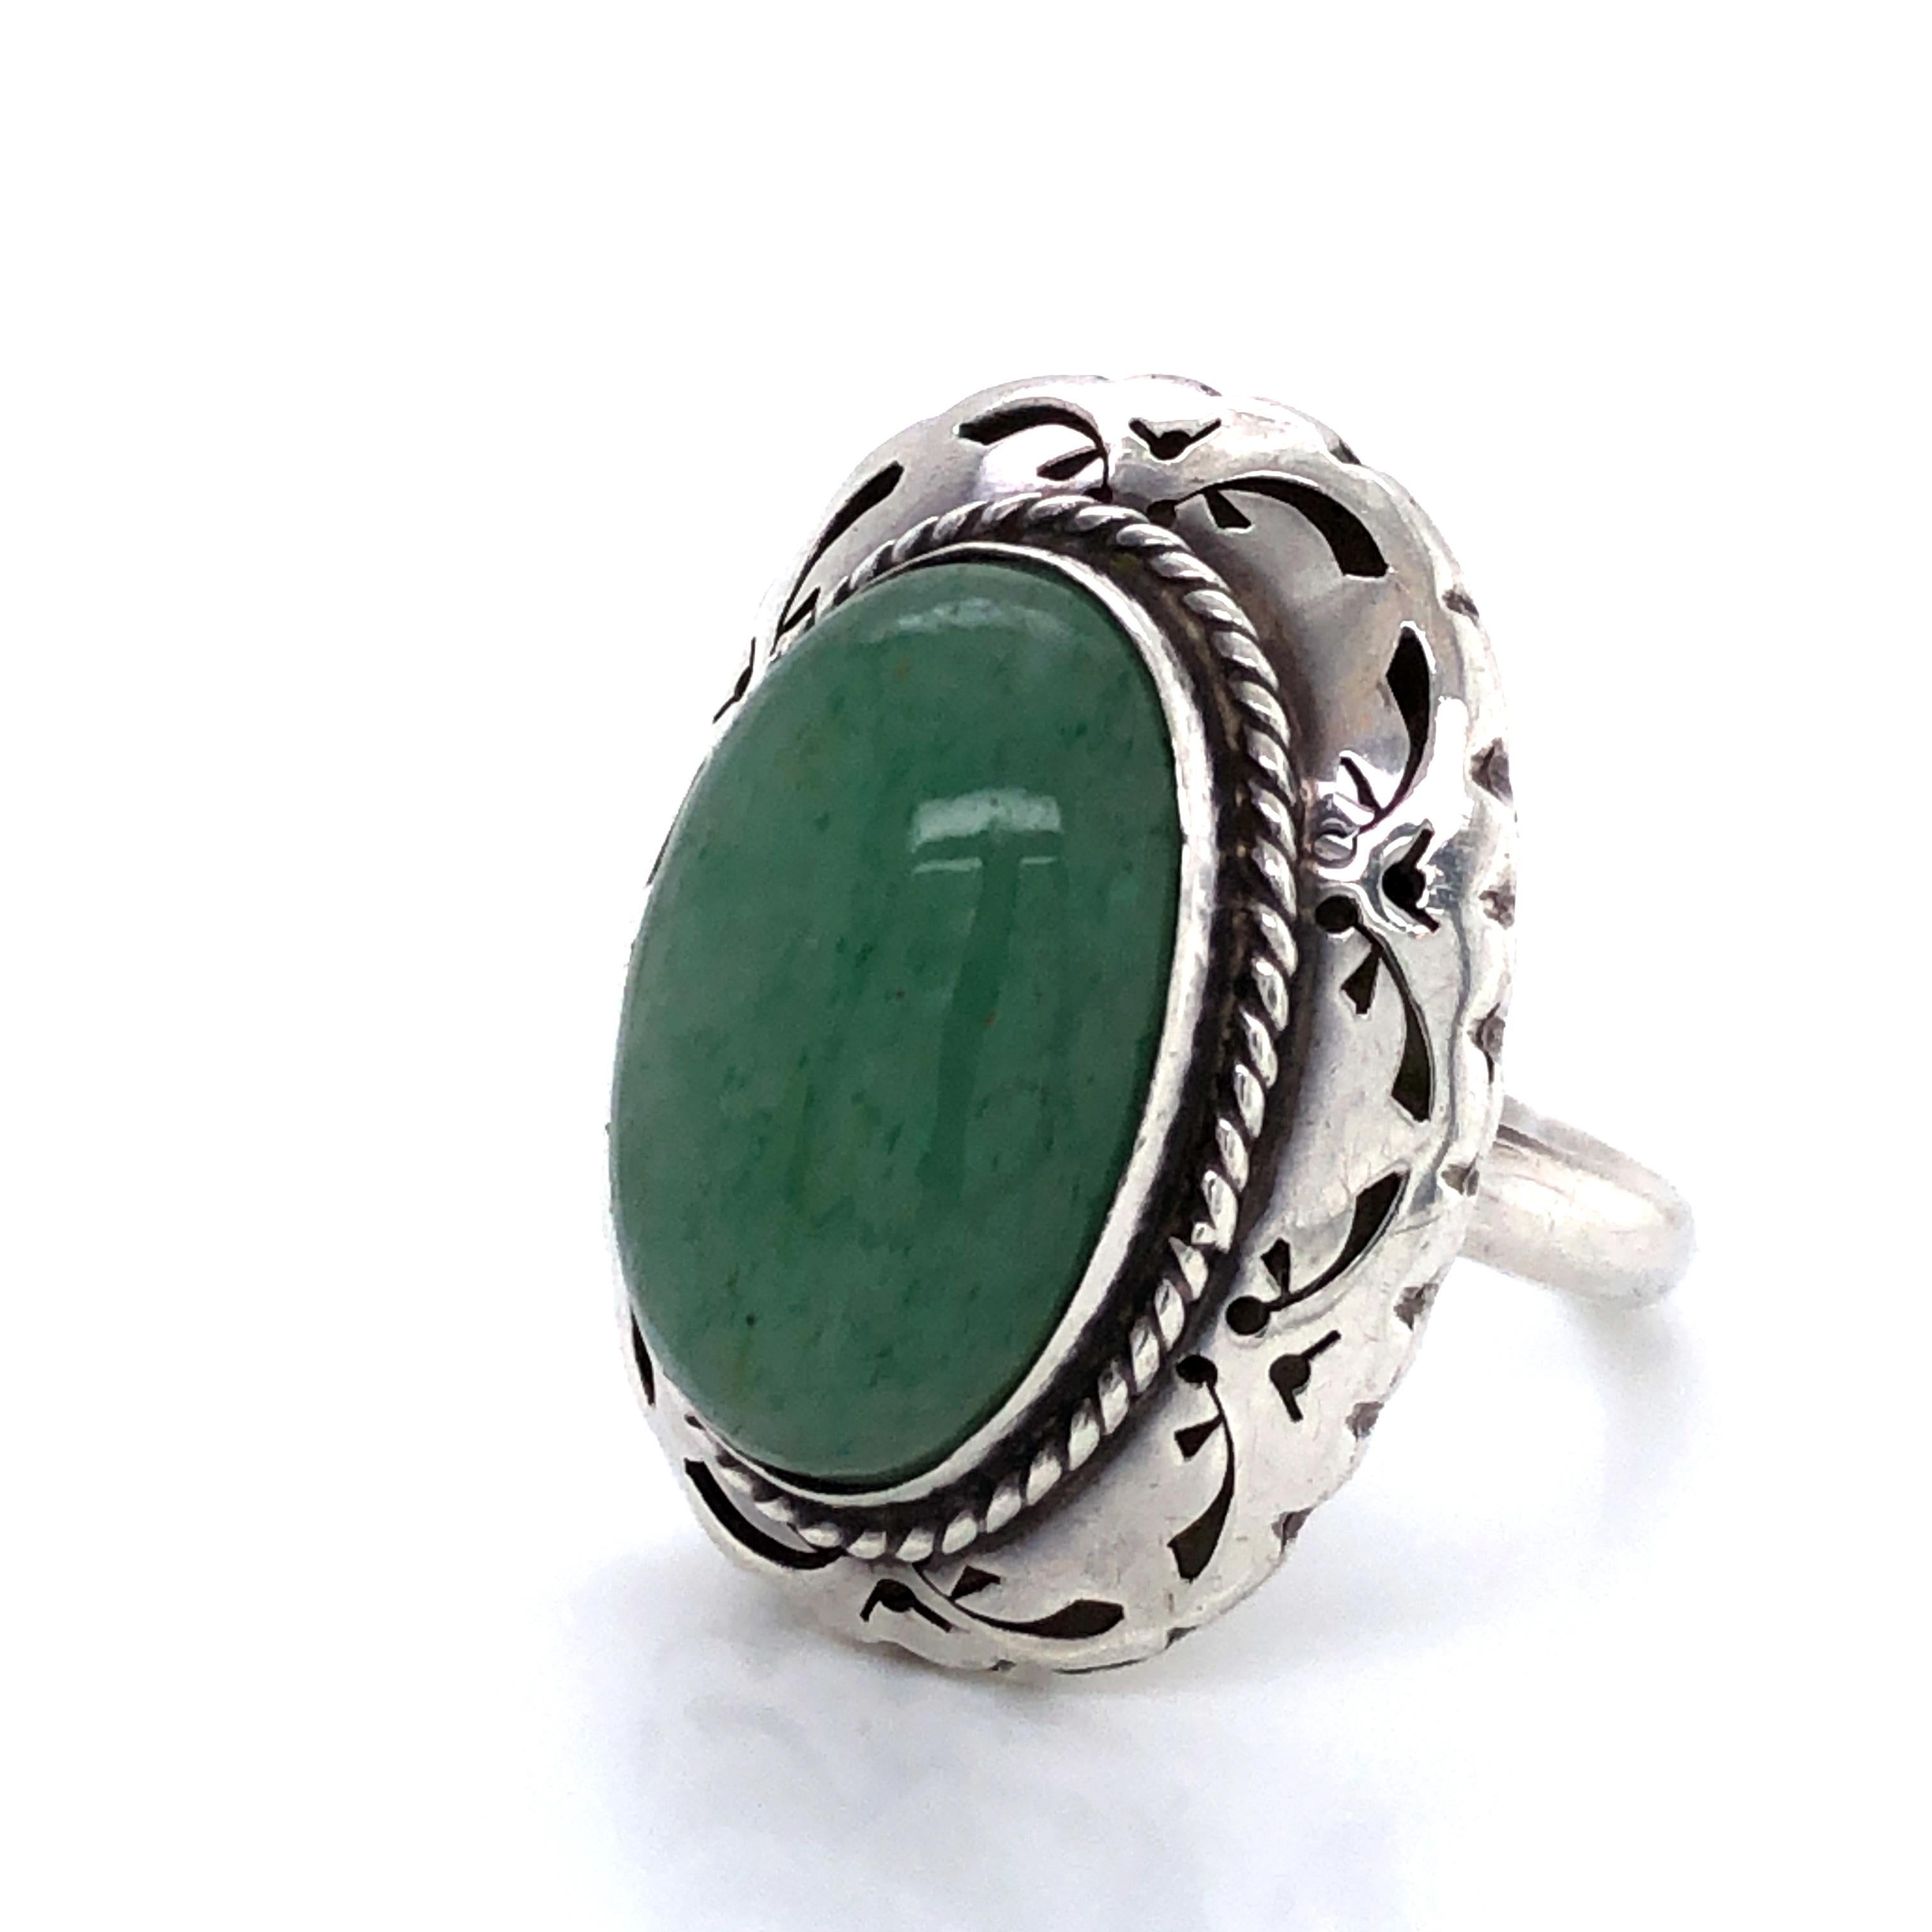 Cabochon Green Turquoise Sterling Silver Ring